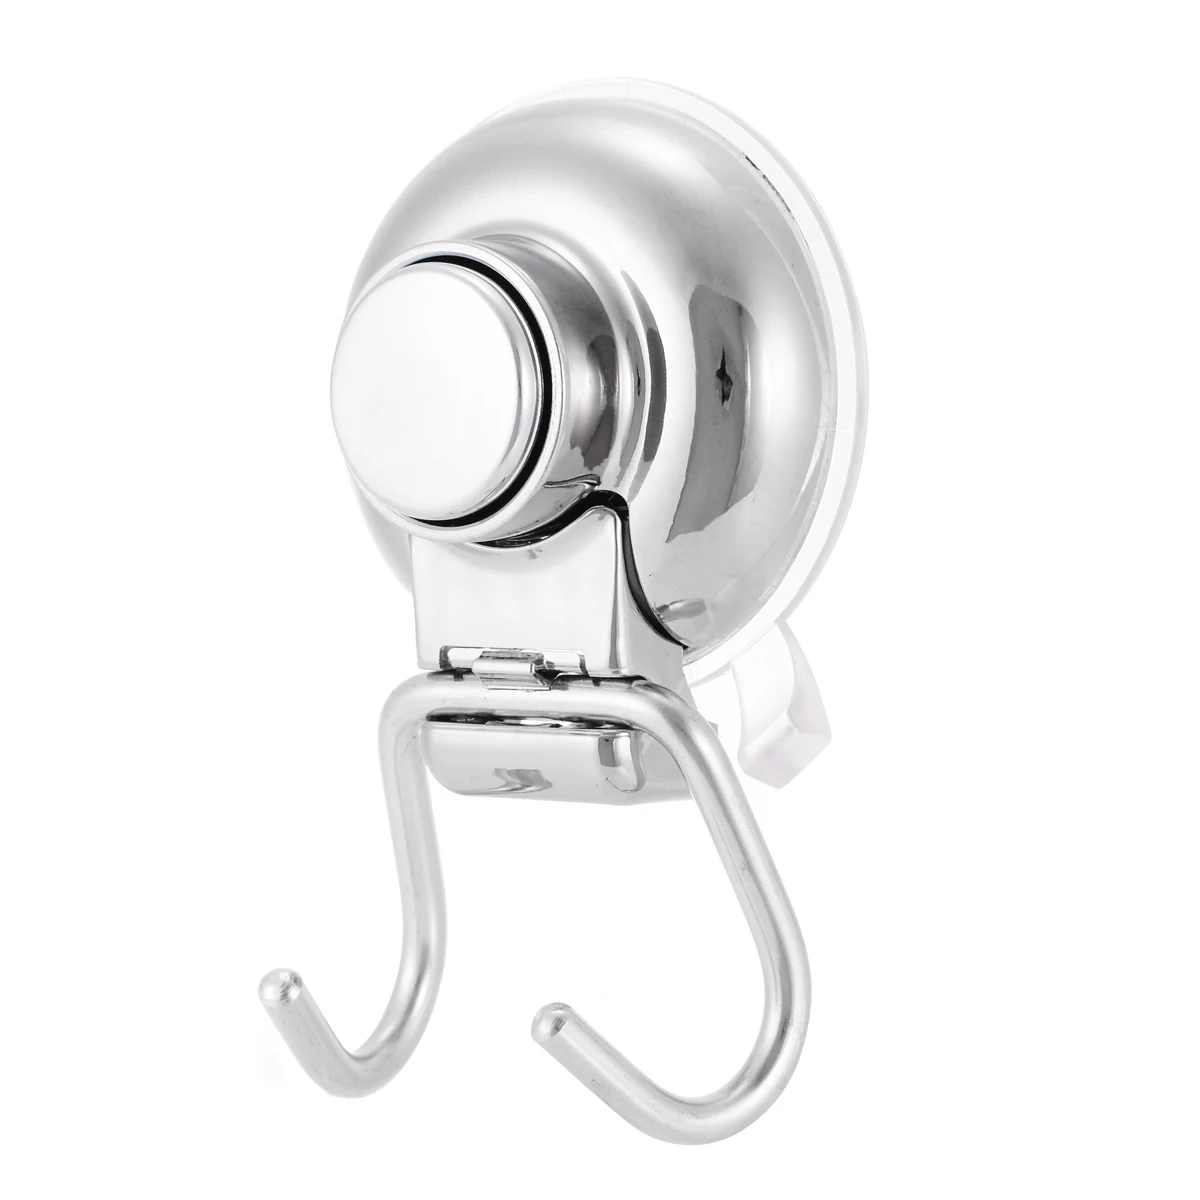 Removable Wall Strong Suction Cup Hook Hangers Stainless Steel Double Hook Strong Vacuum Suction Cup Hanger for Bathroom Kitchen